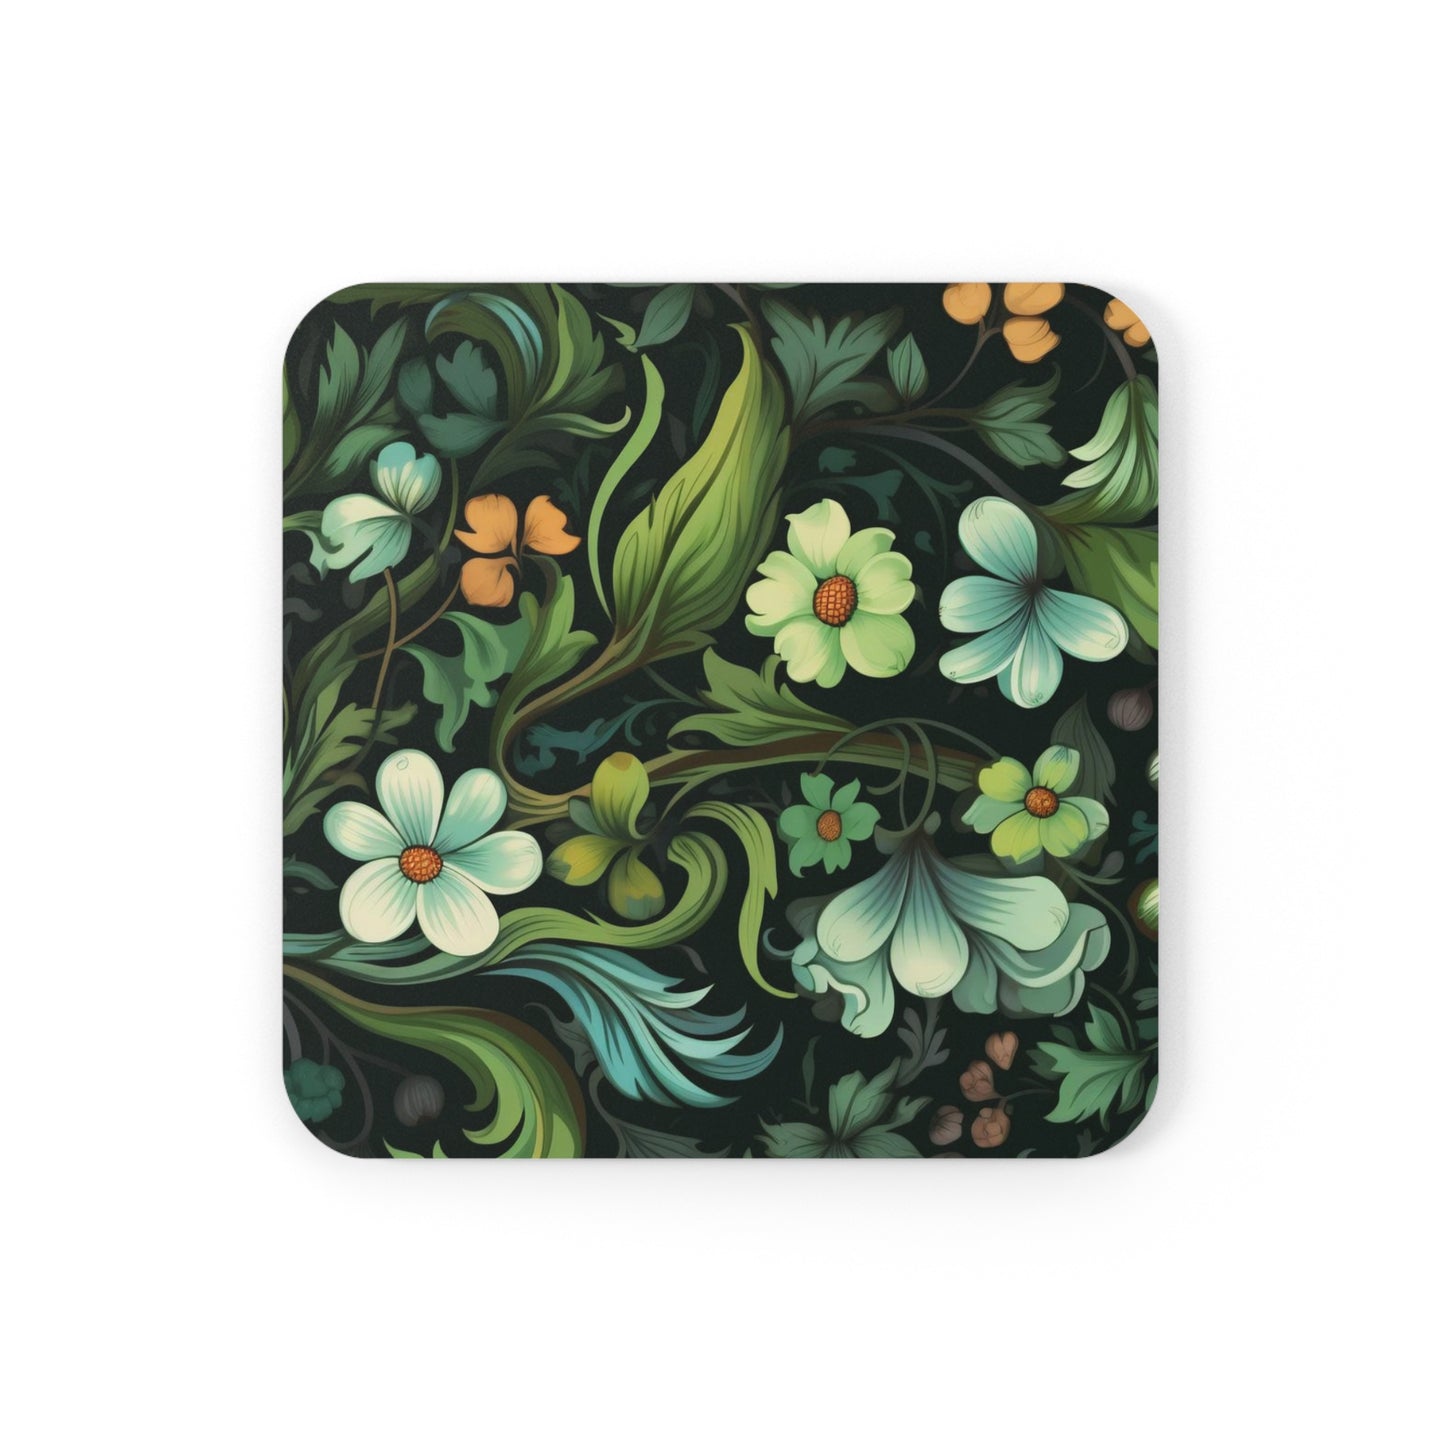 Enchanted Garden Coasters Set of 4, Green and Teal Floral Coffee Cup Mats, Cottagecore Coffee Table Decor, Housewarming Gift, Gift for Her